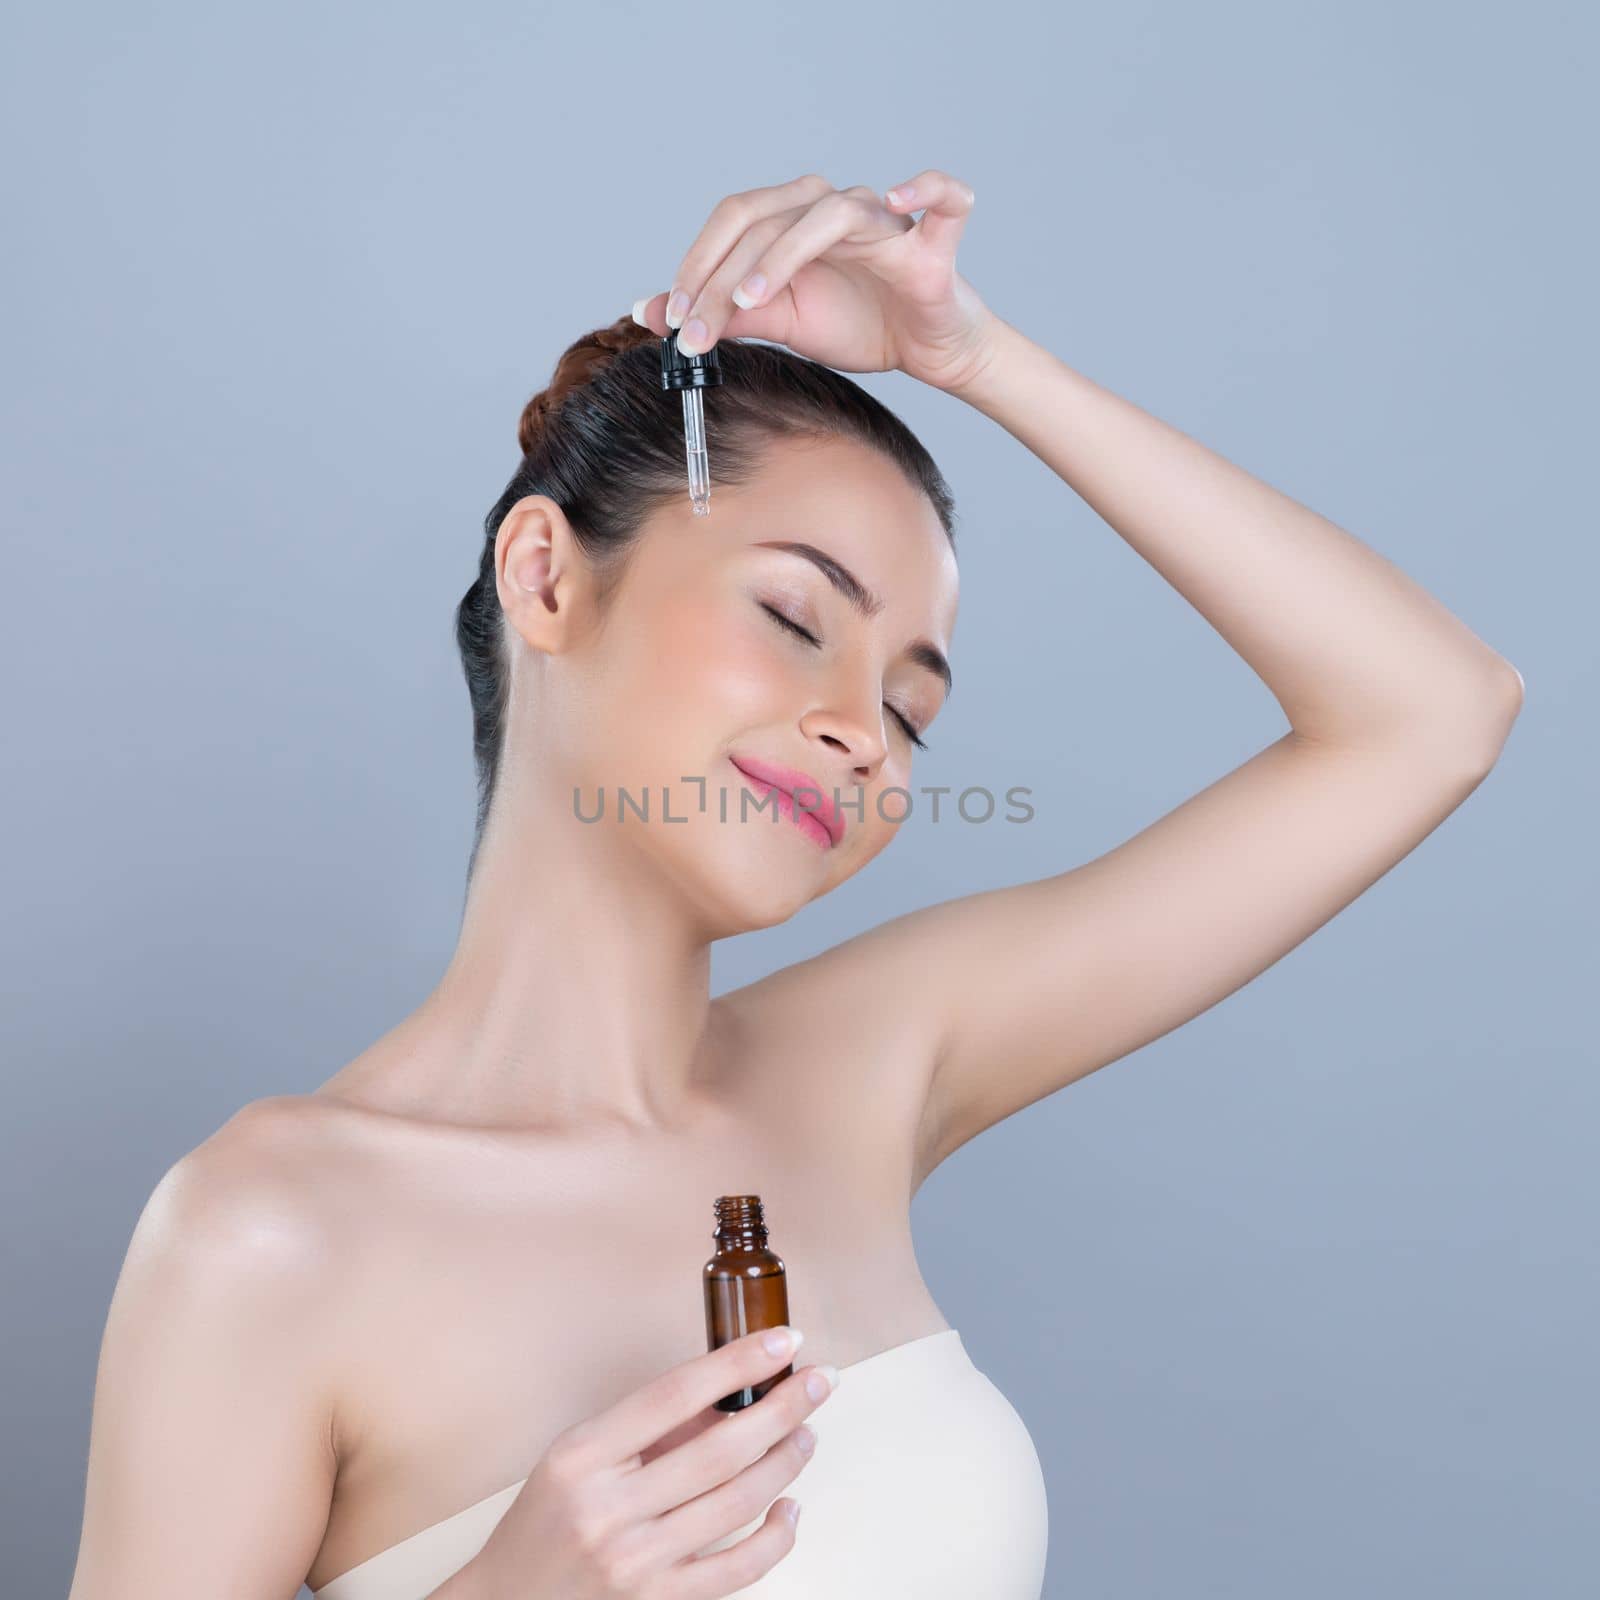 Glamorous portrait of beautiful woman applying extracted cannabis oil bottle for skincare product. CBD oil dropper pipette for cosmetology treatment and cannabinoids concept in isolated background.